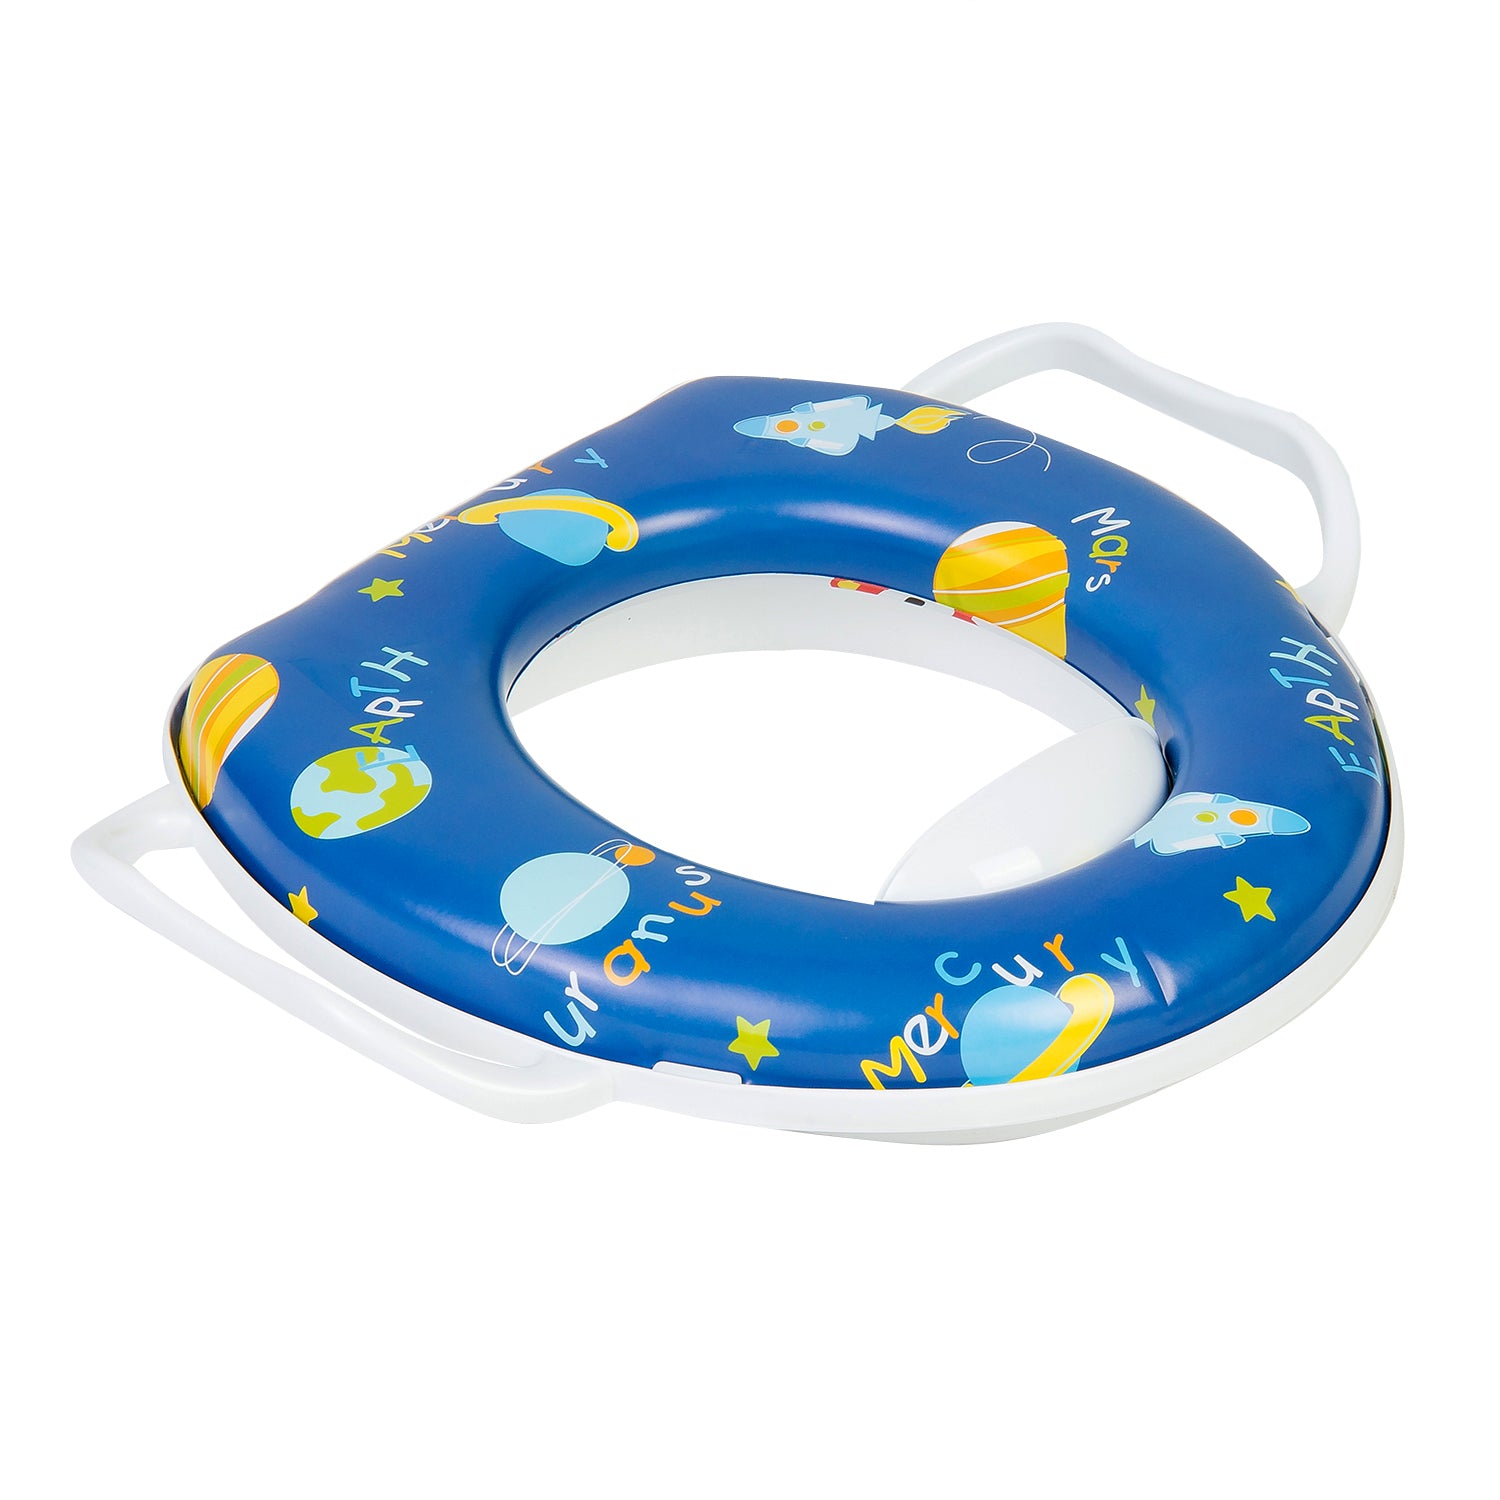 Space Blue Potty Seat With Handle - Baby Moo